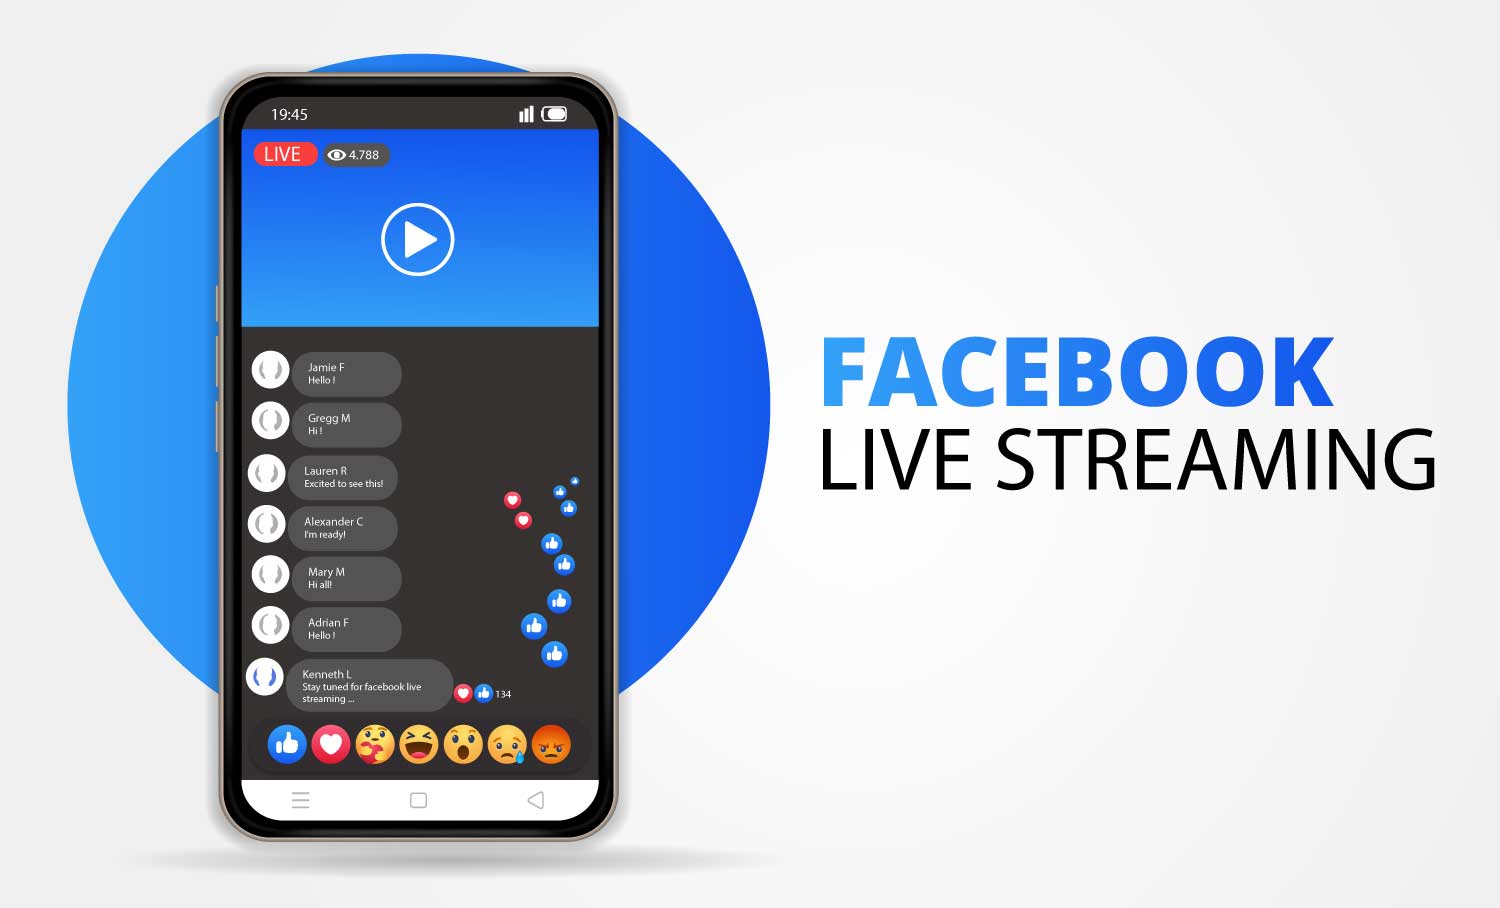 Demonstrate what Facebook Live looks like